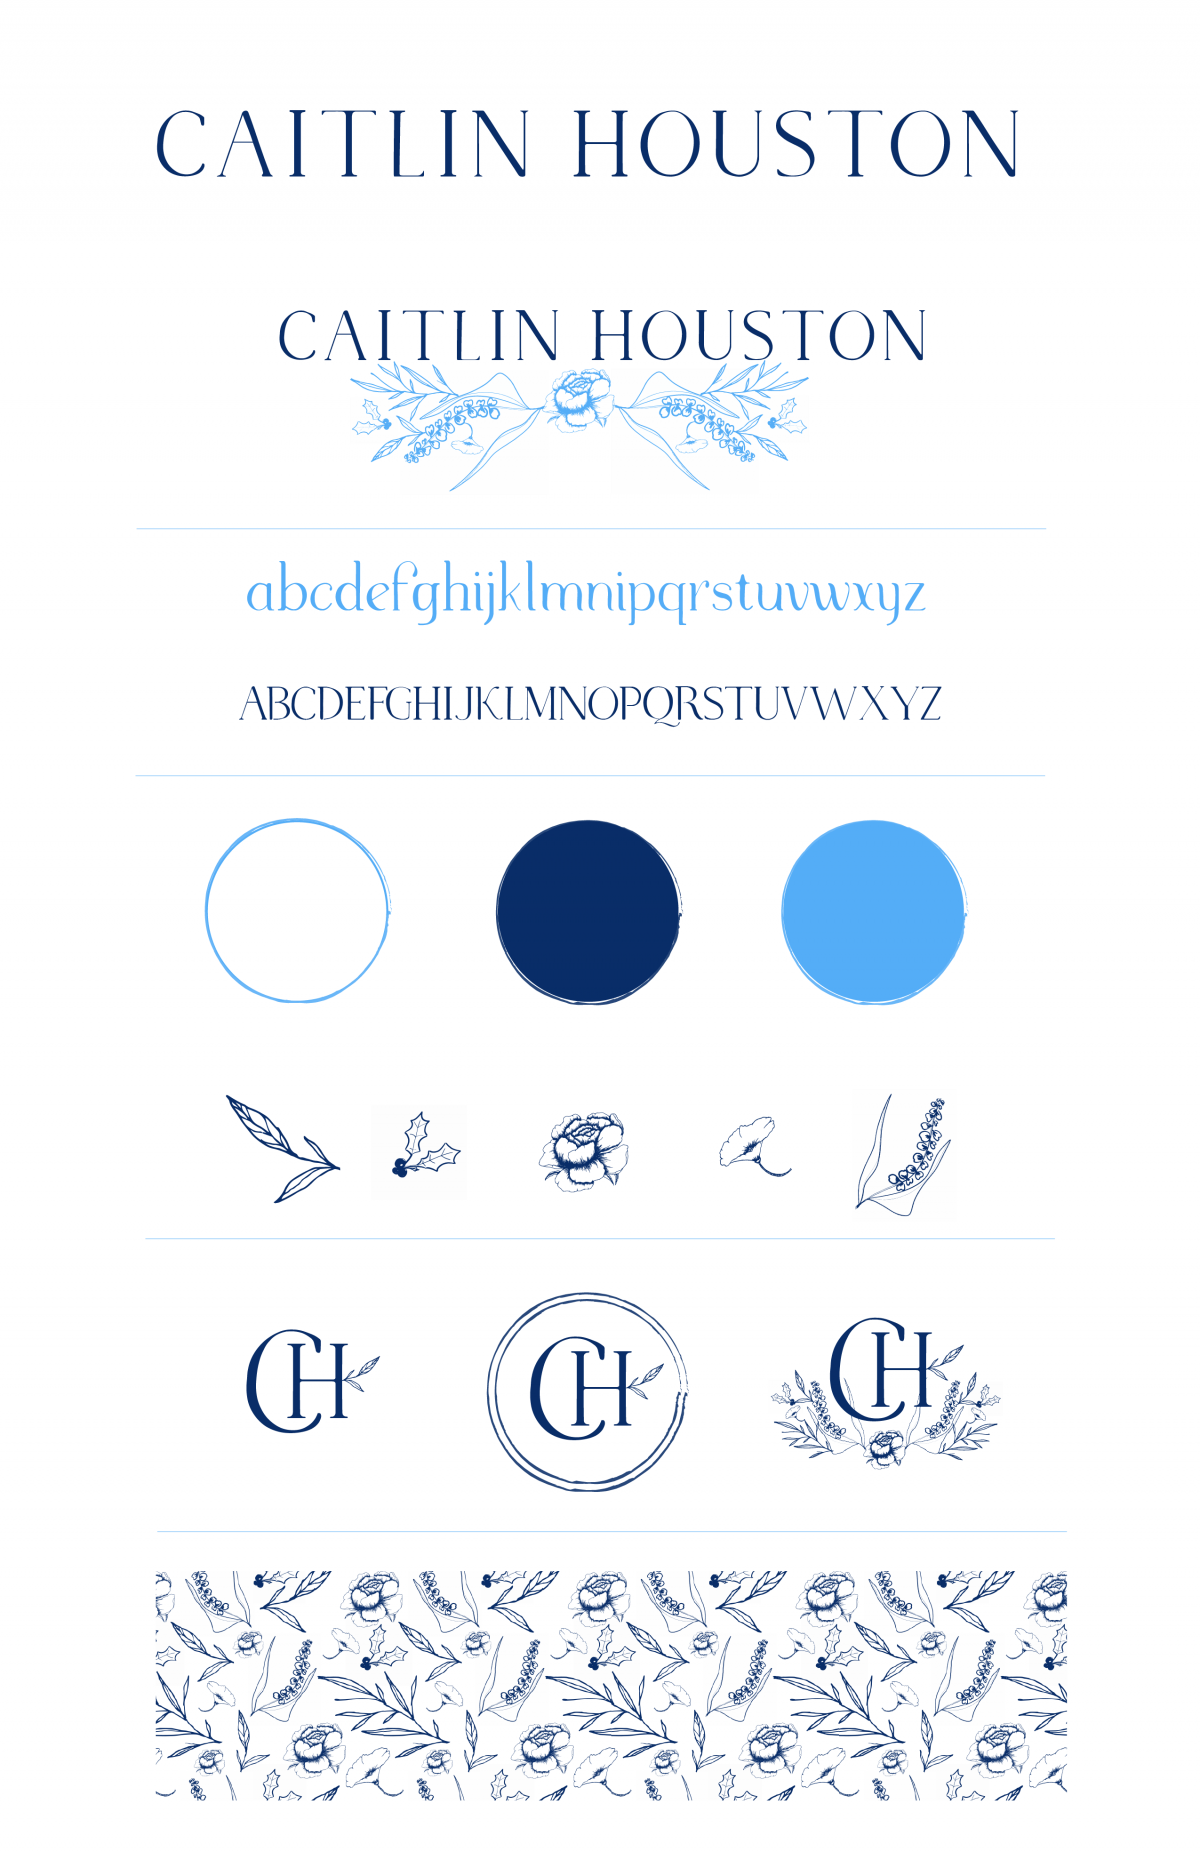 Why I Rebranded My Blog - Caitlin Houston - Brand Board Example